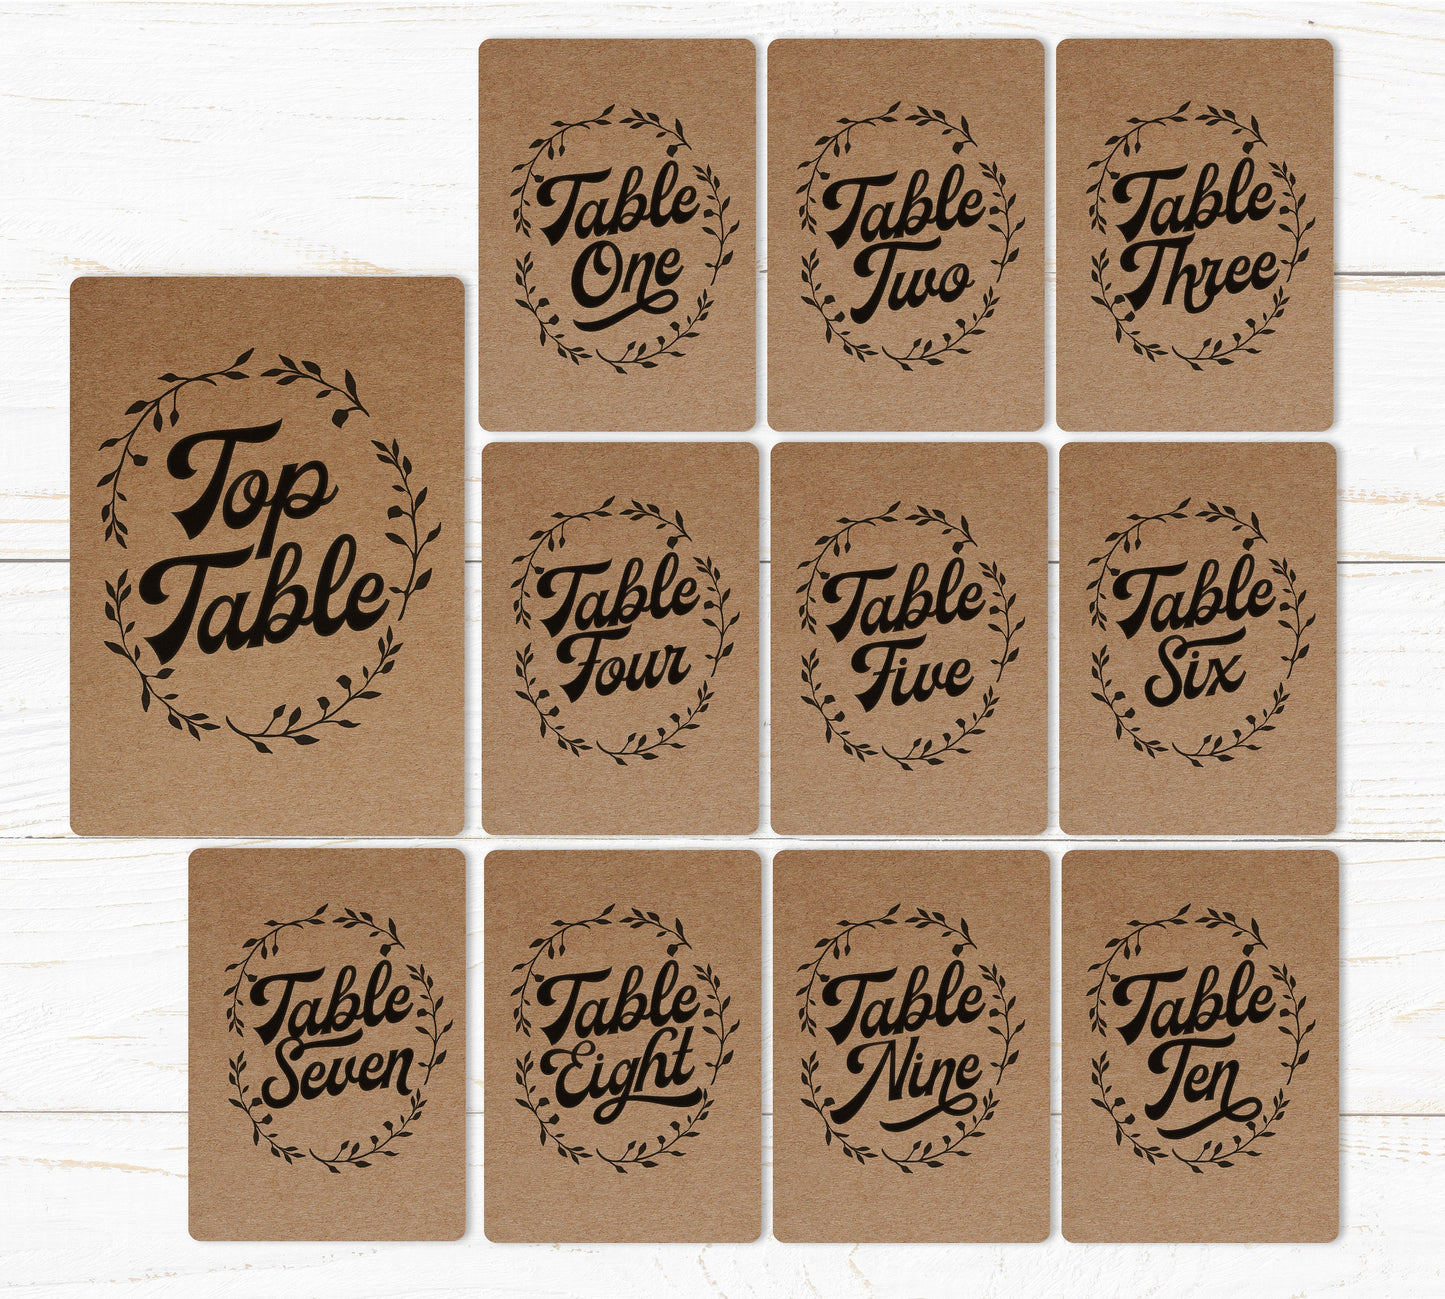 Wedding Table Number Cards - Recycled Kraft. Wedding Tables one to ten and Top Table. Wedding stationery pack.